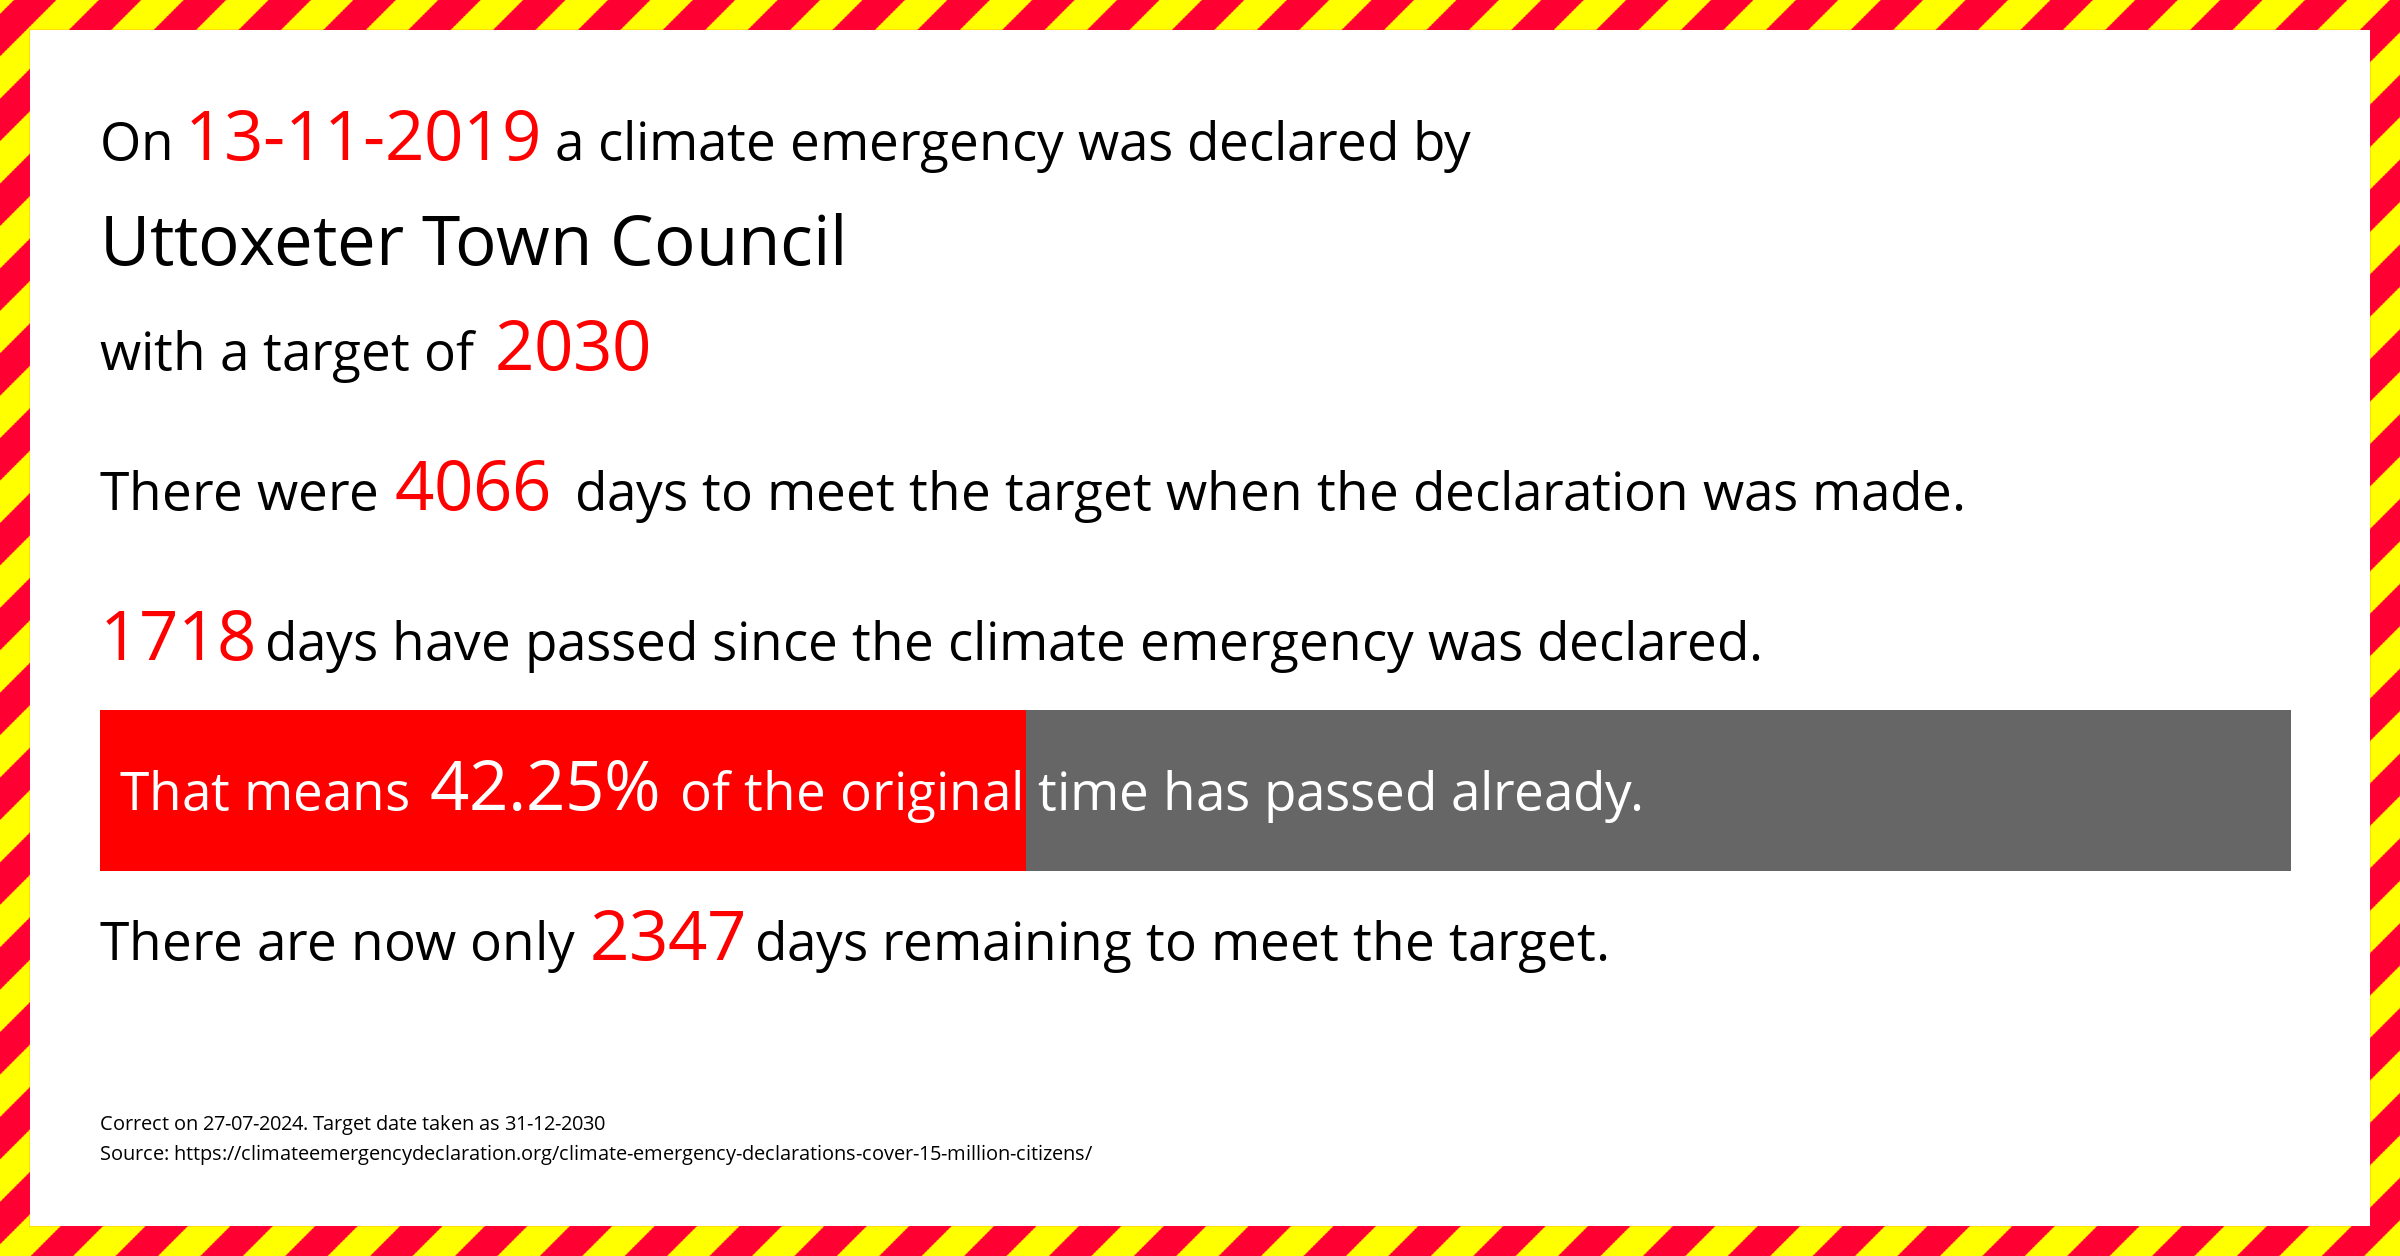 Uttoxeter Town Council declared a Climate emergency on Wednesday 13th November 2019, with a target of 2030.